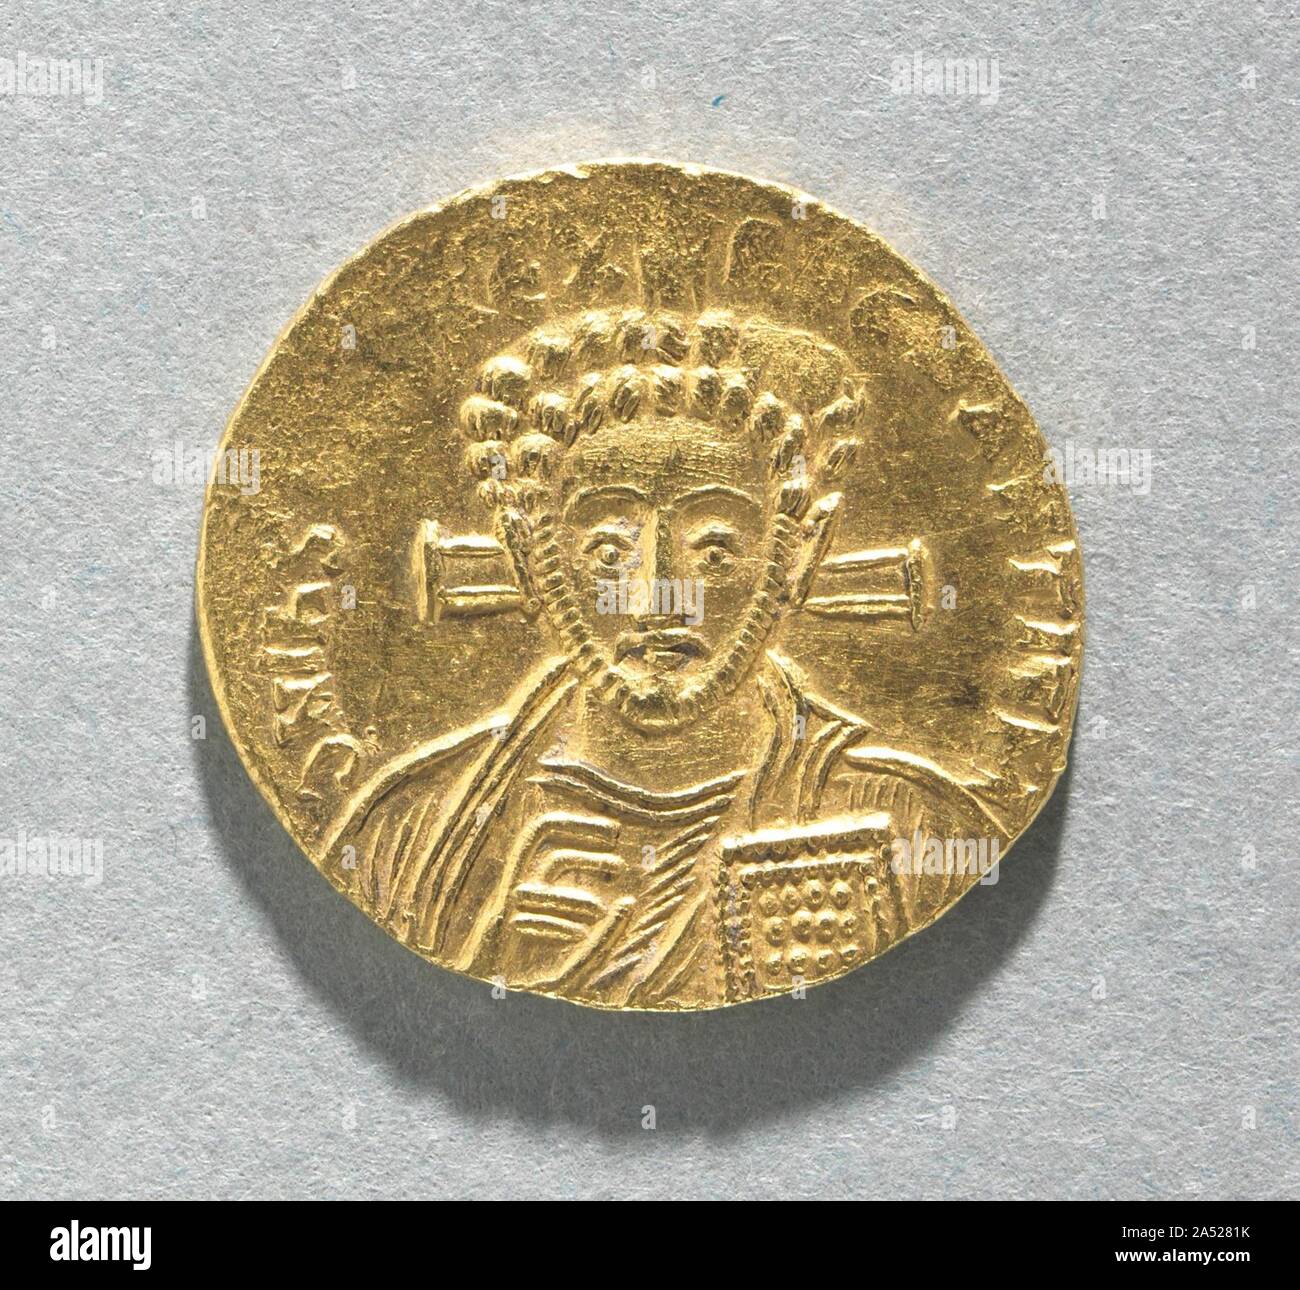 Solidus of Justinian II with Bust of Christ (obverse), 705. Byzantine Gold Coins The vast number of surviving Byzantine coins attests to the level of trade across the empire. Controlled and supervised by the emperor, the producers of coins took care to represent his authority and reflect his stature. Talented artists were recruited to engrave the dies (molds) used for the striking of coins. Emperors increasingly came to include their heirs and co-emperors on their coinage, as well as other family members or even earlier rulers. Coins were recognized, then as now, as small, portable works of ar Stock Photo